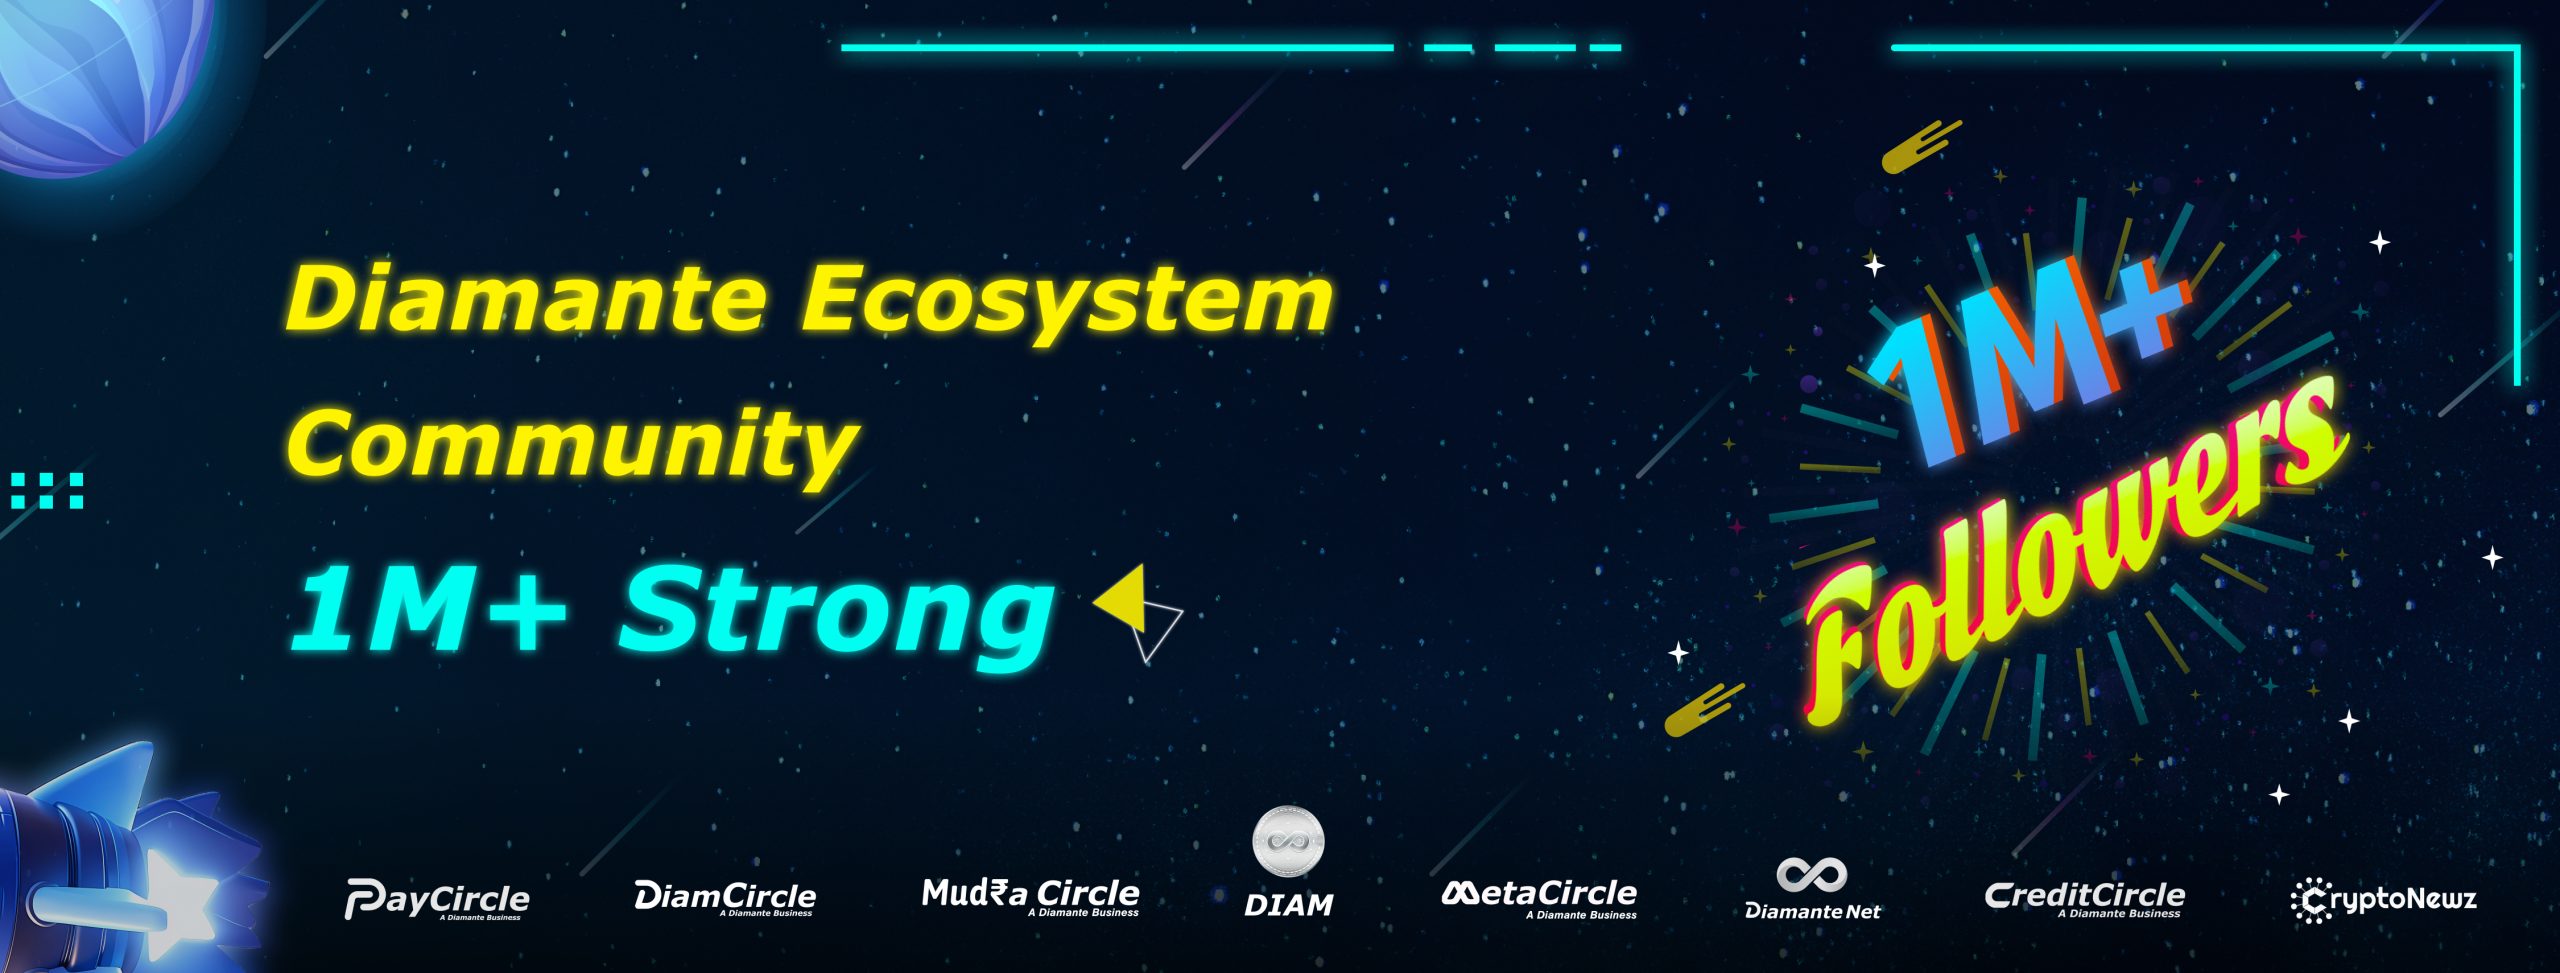 oin the cosmic celebration of the Diamante Ecosystem Community surpassing 1 million followers! Discover our vibrant network of PayCircle, DiamCircle, and more, all united under the stellar banner of innovation and connection.